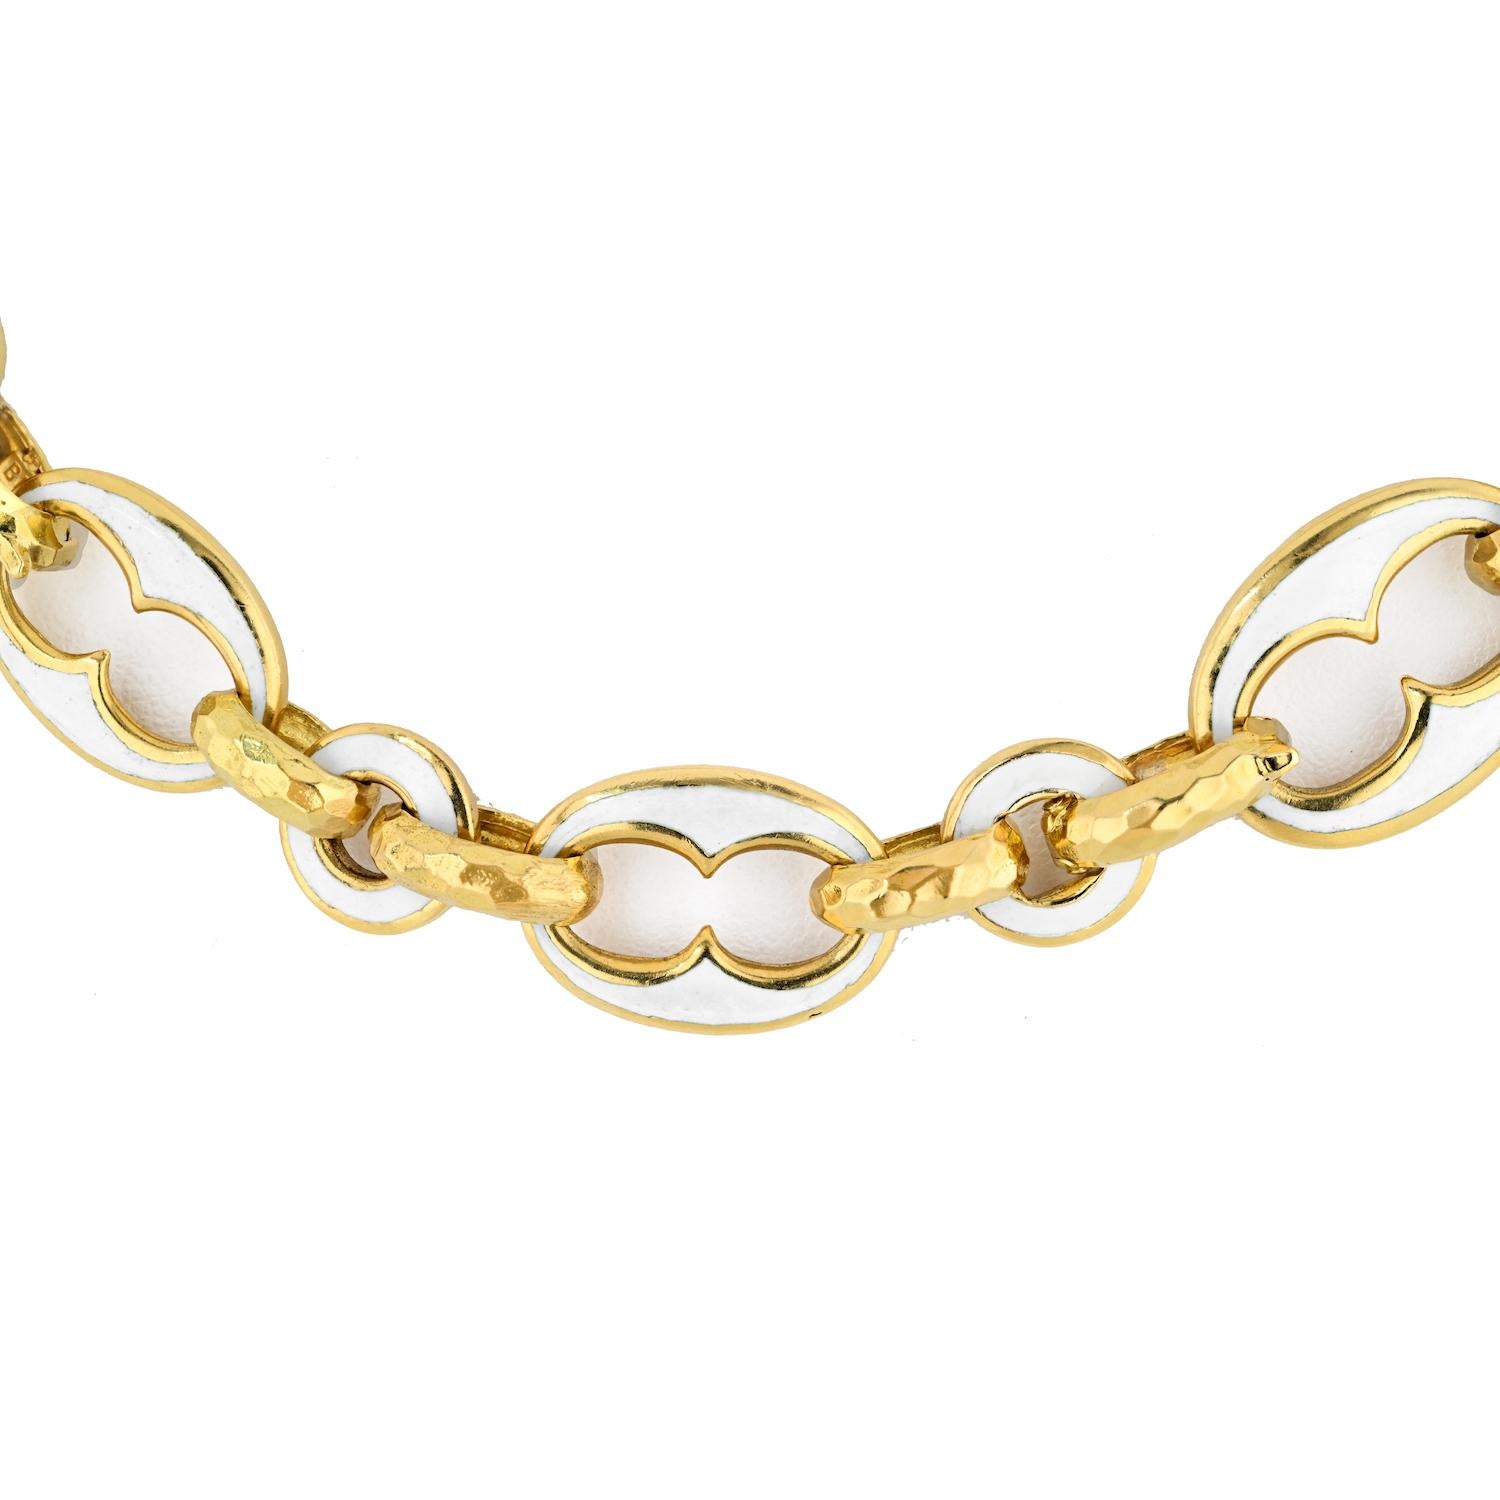 David Webb 18K Yellow Gold White Enamel 32 Inch Necklace In Excellent Condition For Sale In New York, NY